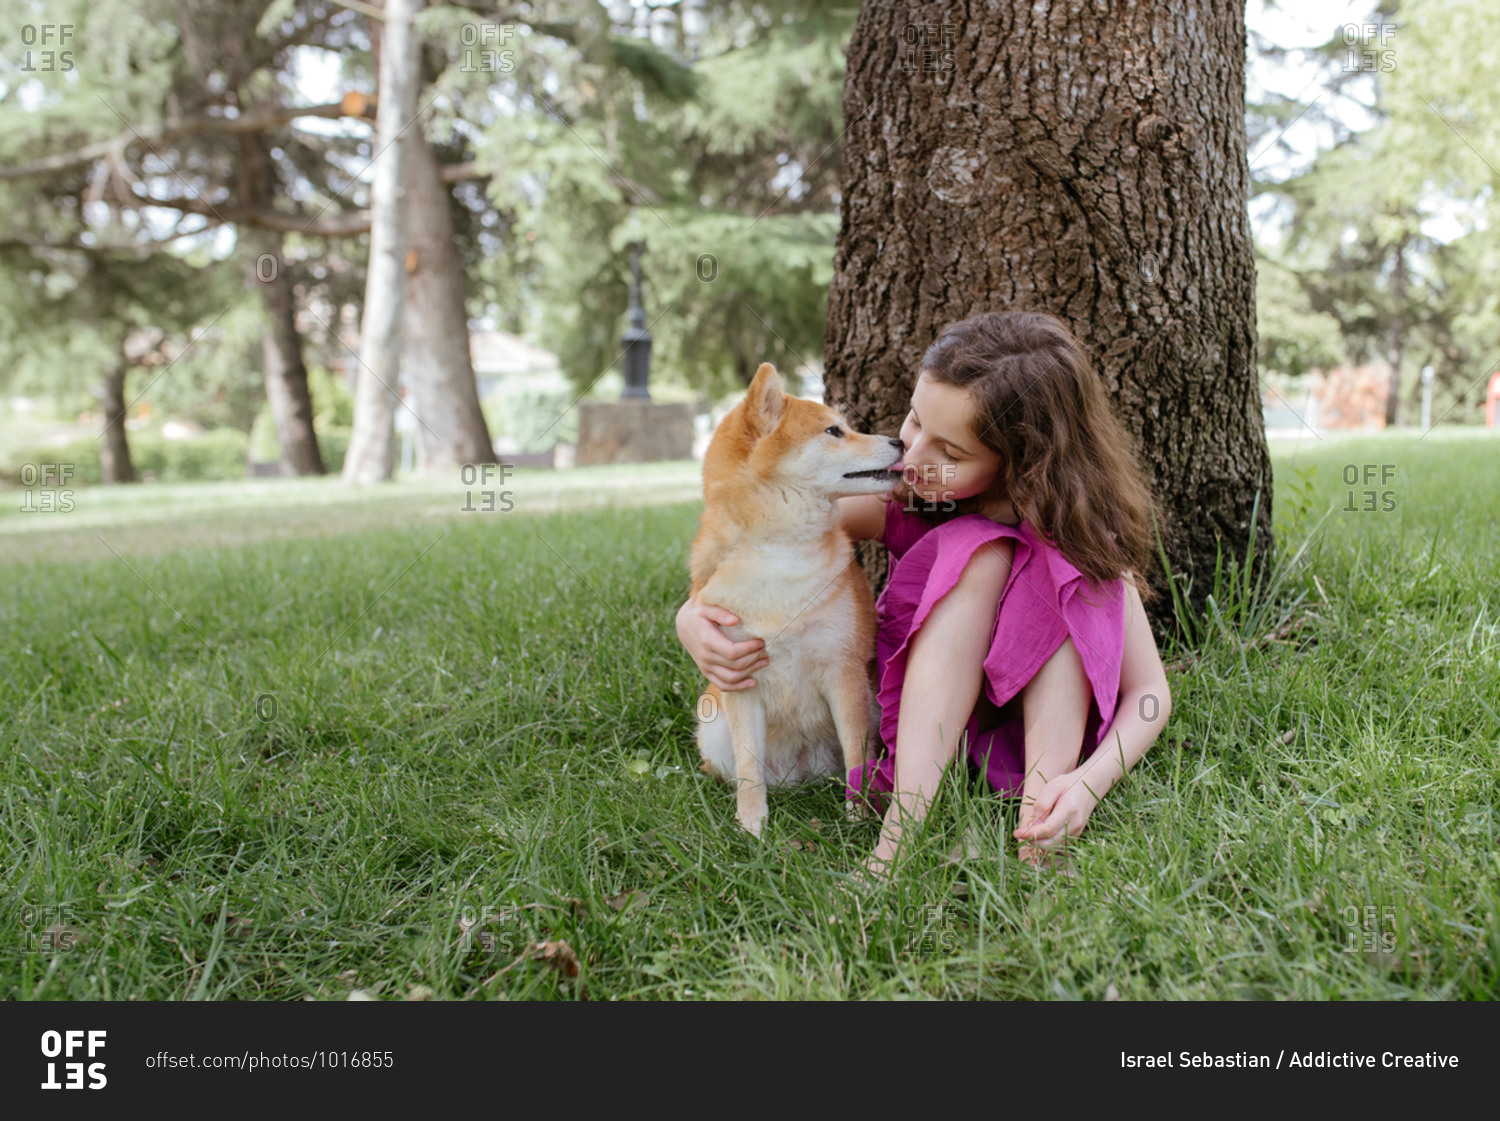 Little girl in summer dress embracing and kissing cute Shiba Inu dog while sitting together on green lawn near tree in summer park